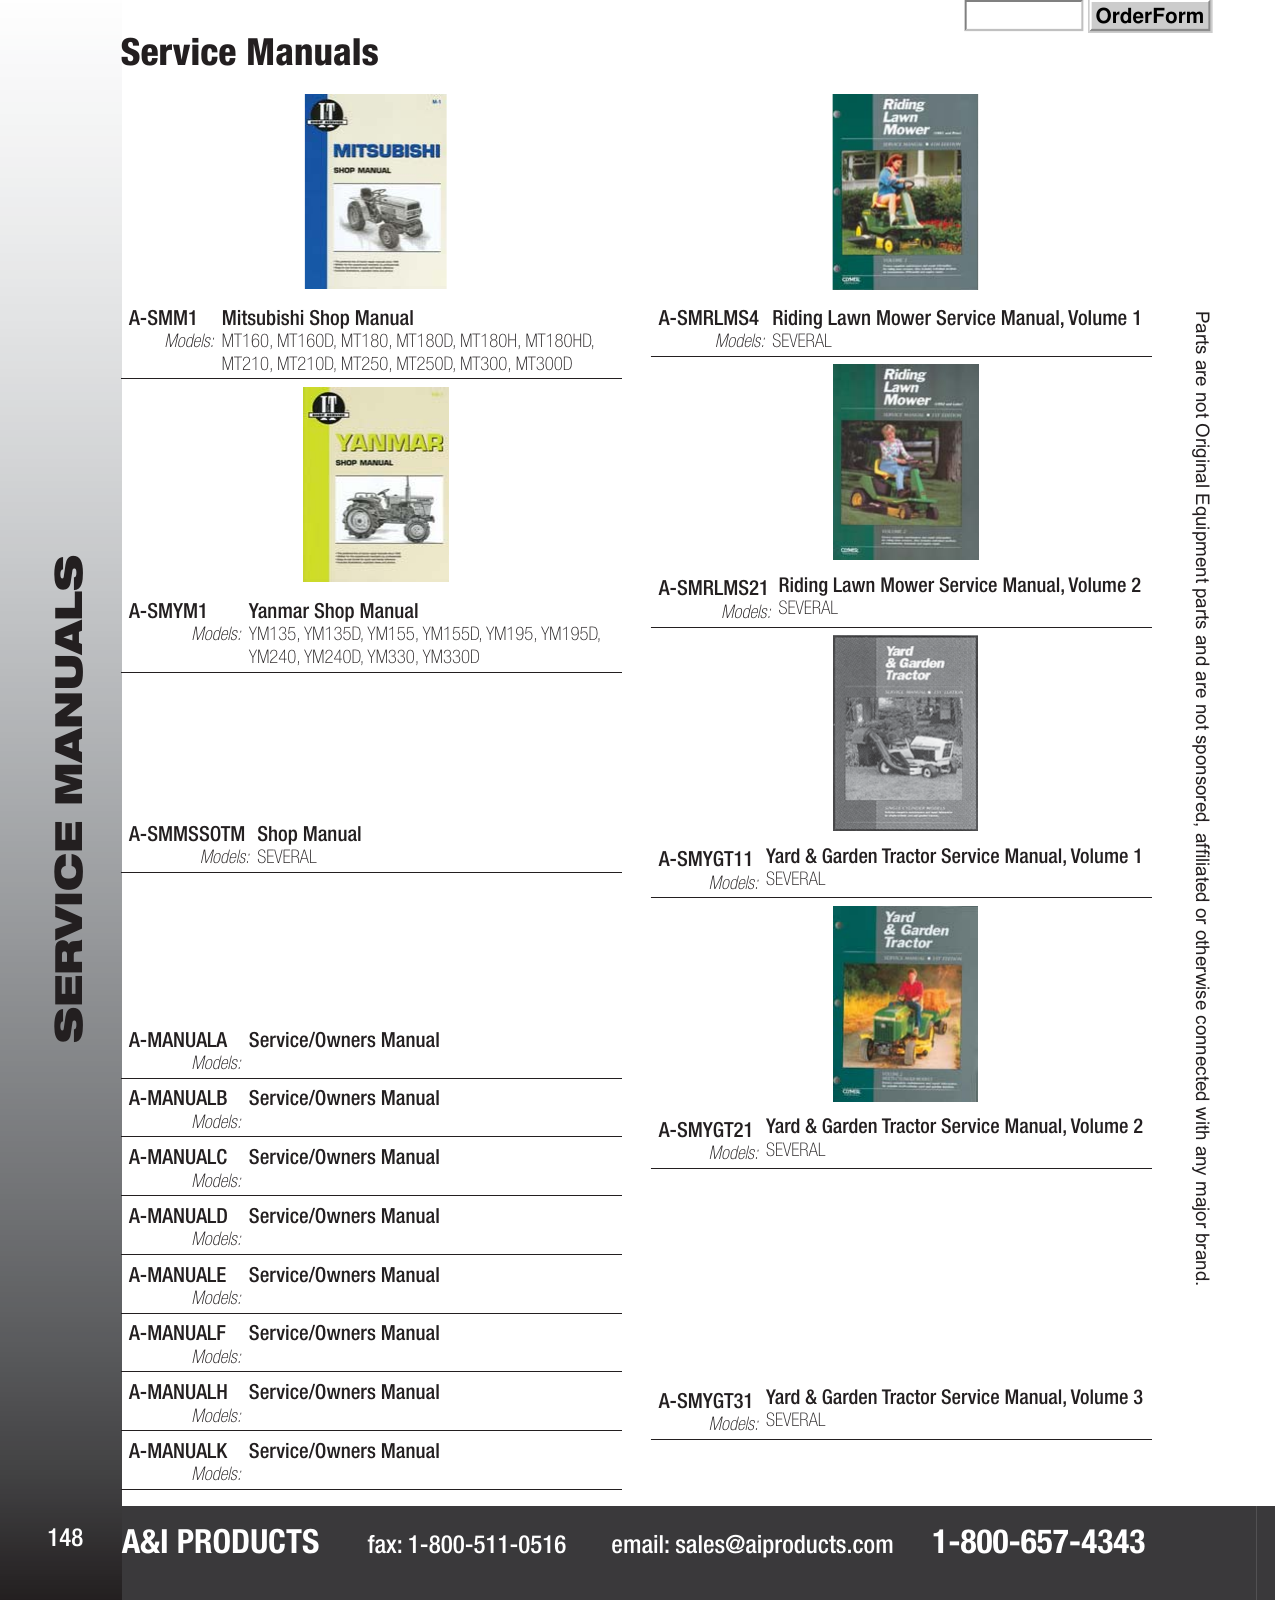 Page 4 of 8 - Catalog  !! Manuals